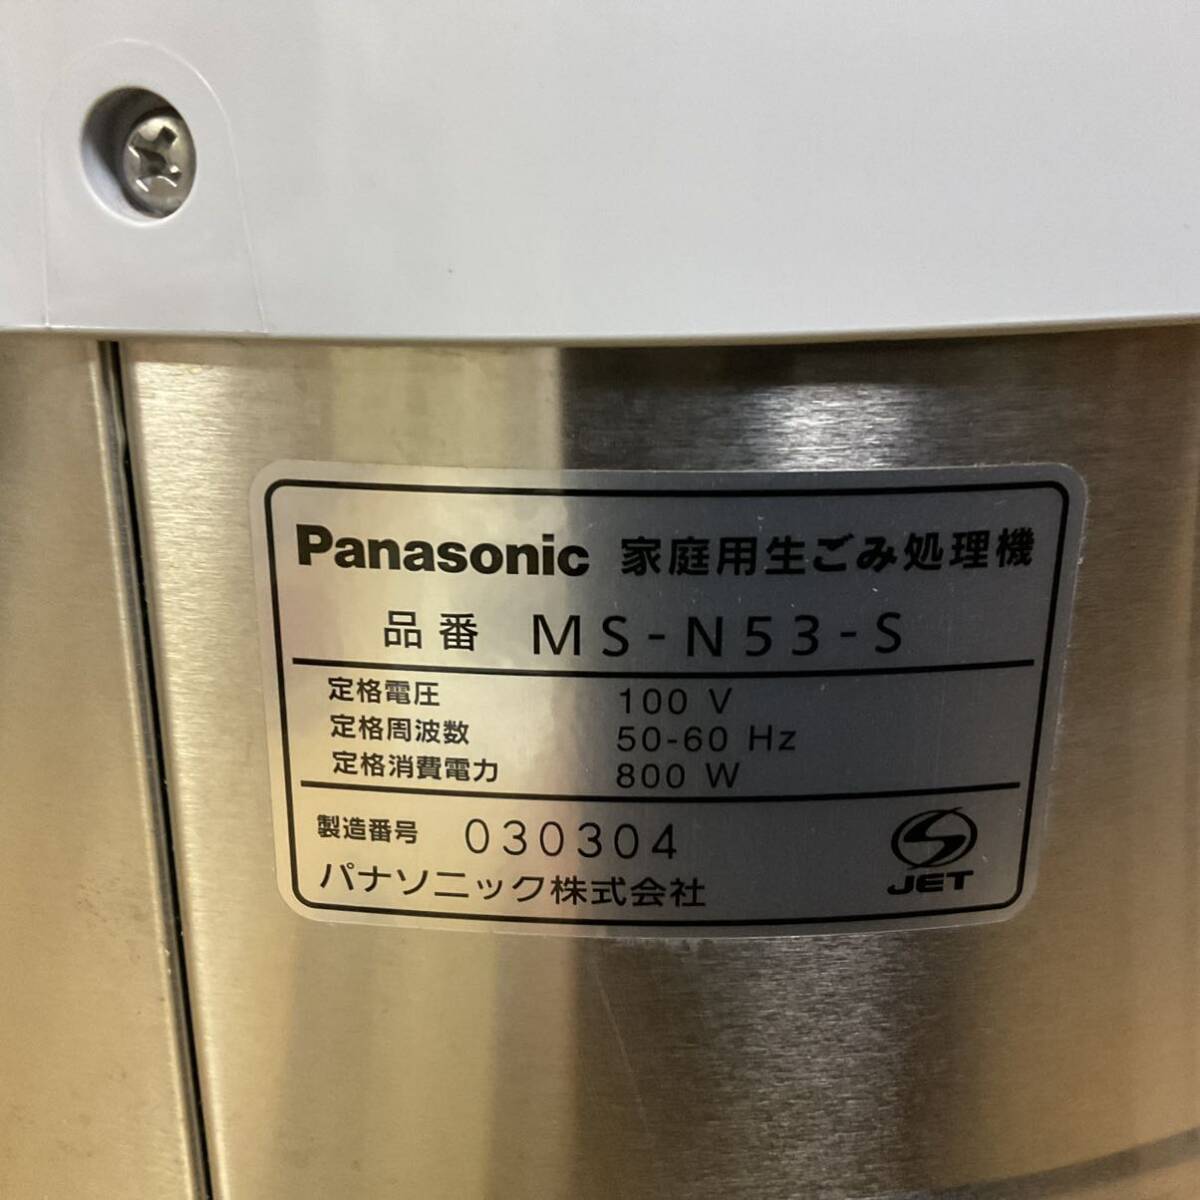  almost new goods * Panasonic garbage disposal *MS-N53* energy conservation recycle la-* raw litter processing machine 